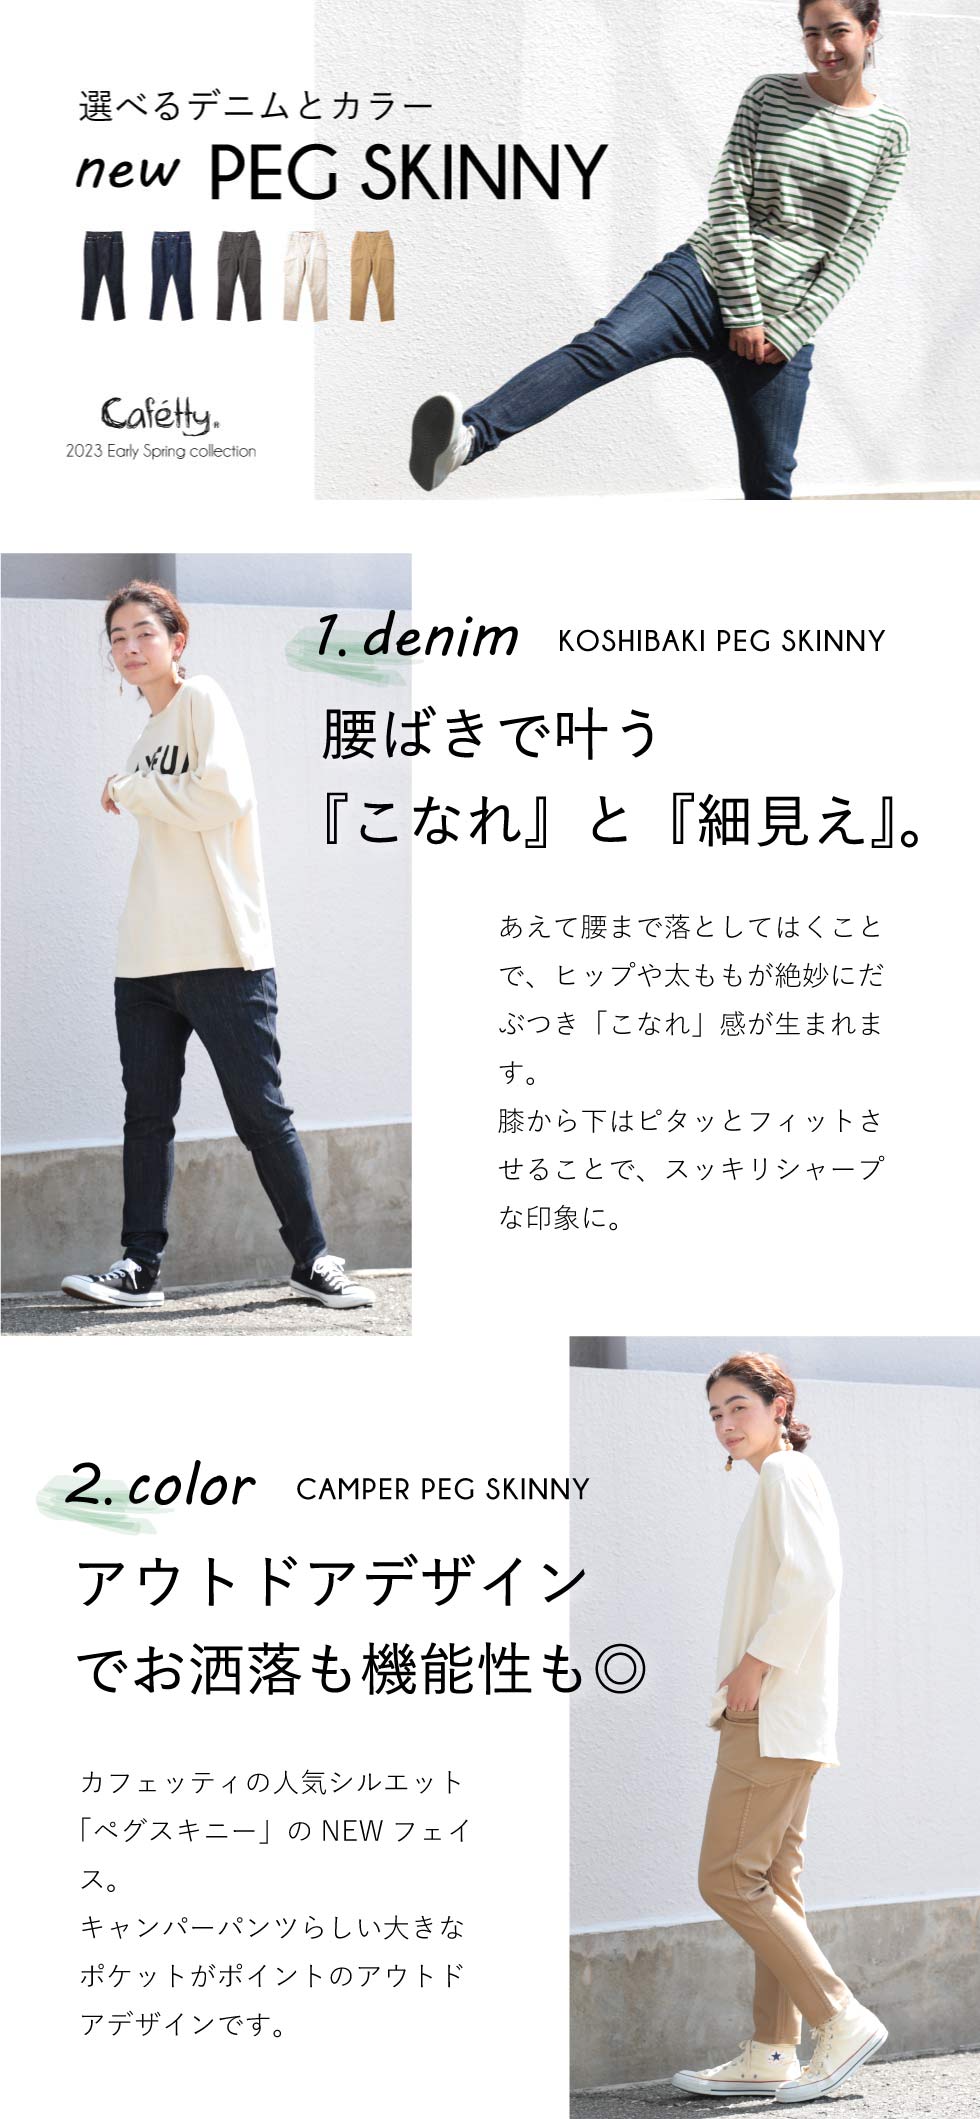 【Cafetty】カフェッティ　new PEG SKINNY商品一覧